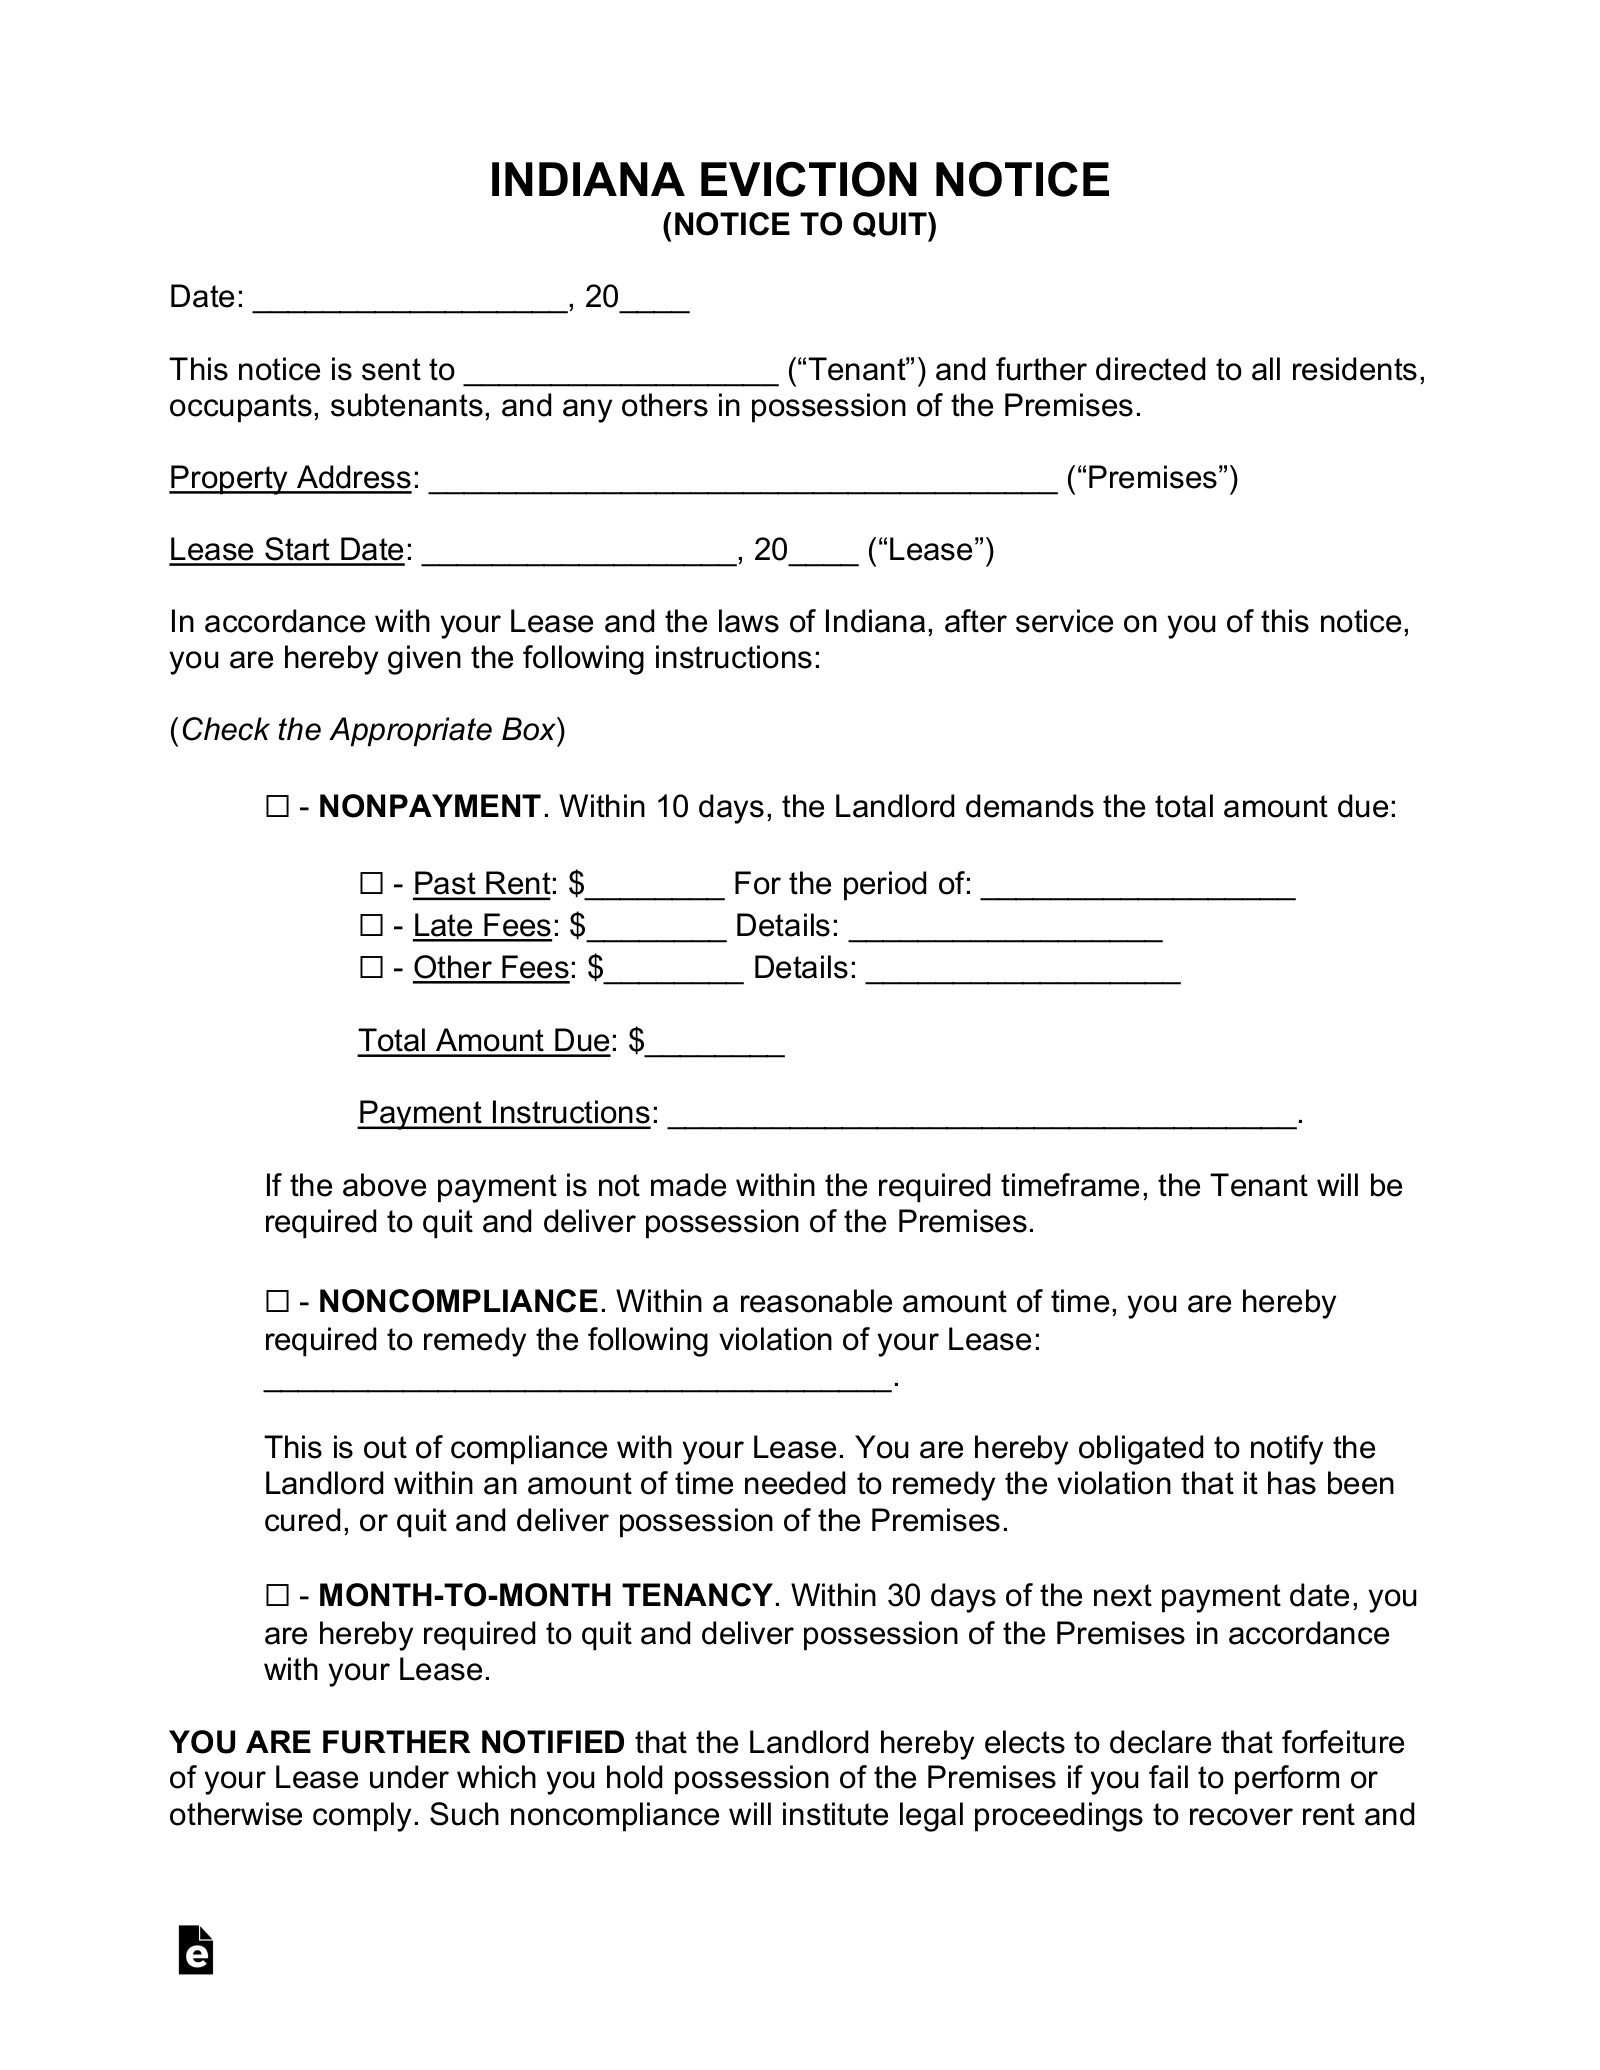 Indiana Eviction Notice Forms (3)